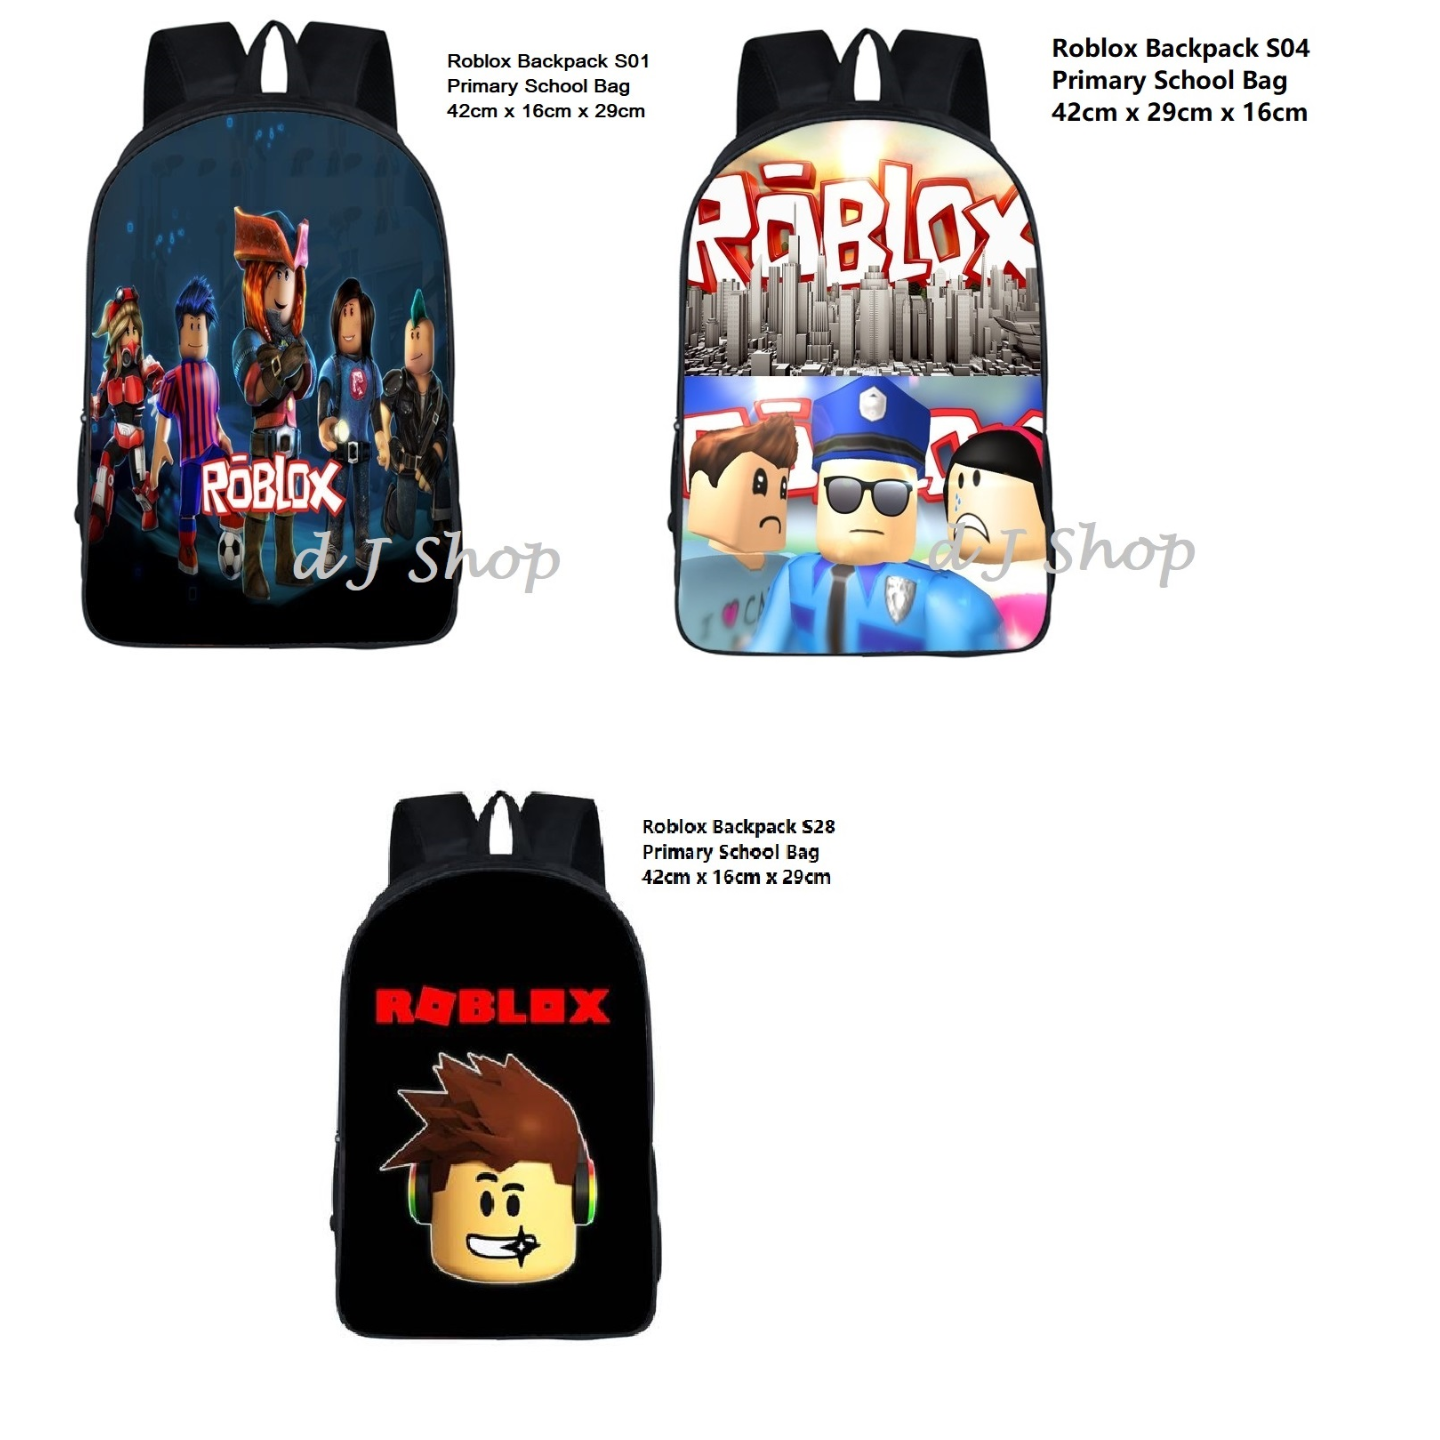 Roblox Primary School Bag Buy Sell Online Backpacks With Cheap - roblox backpack for students boys girls polyester schoolbag roblox